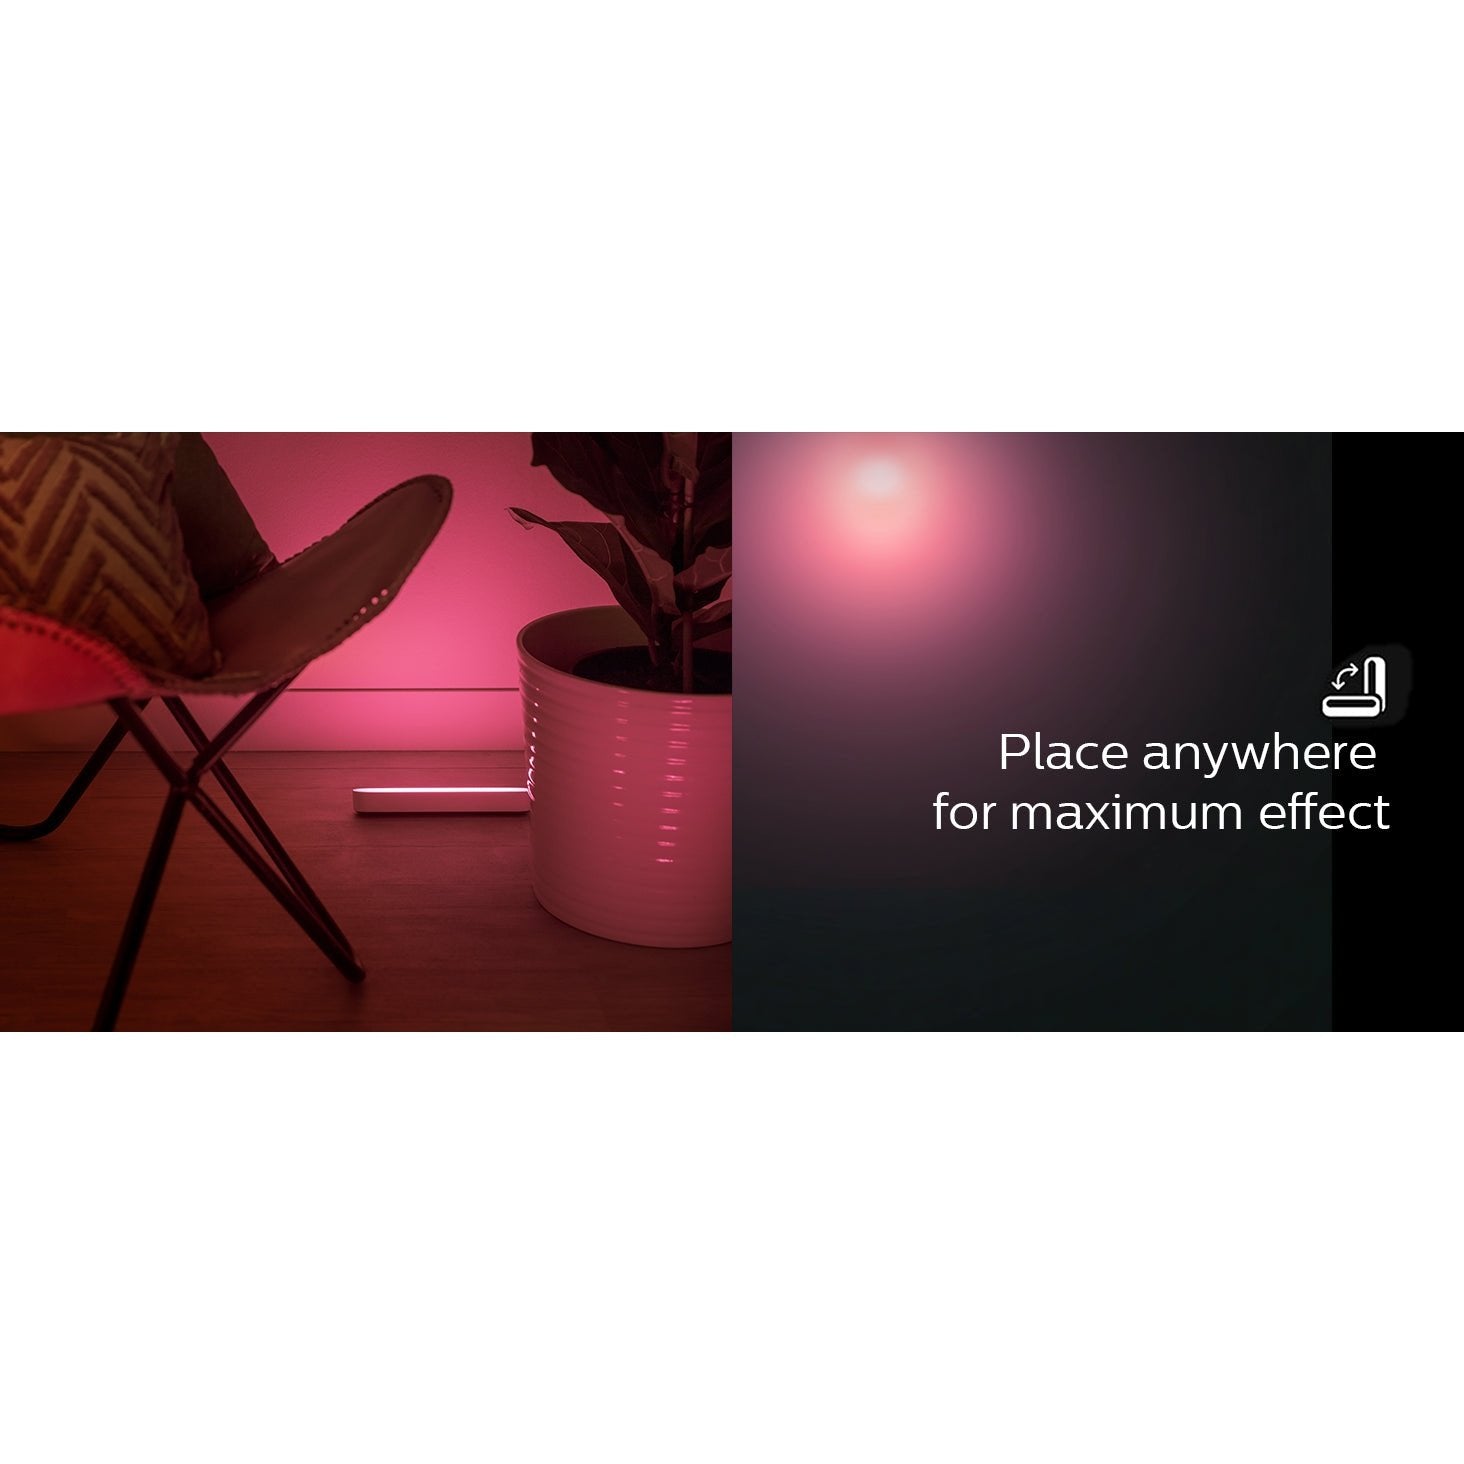 Philips Hue Smart Play Light Bar Base Kit, Black - White & Color Ambiance LED Color-Changing Light - 2 Pack - Requires Bridge - Control with App - Works with Alexa, Google Assistant and Apple HomeKit